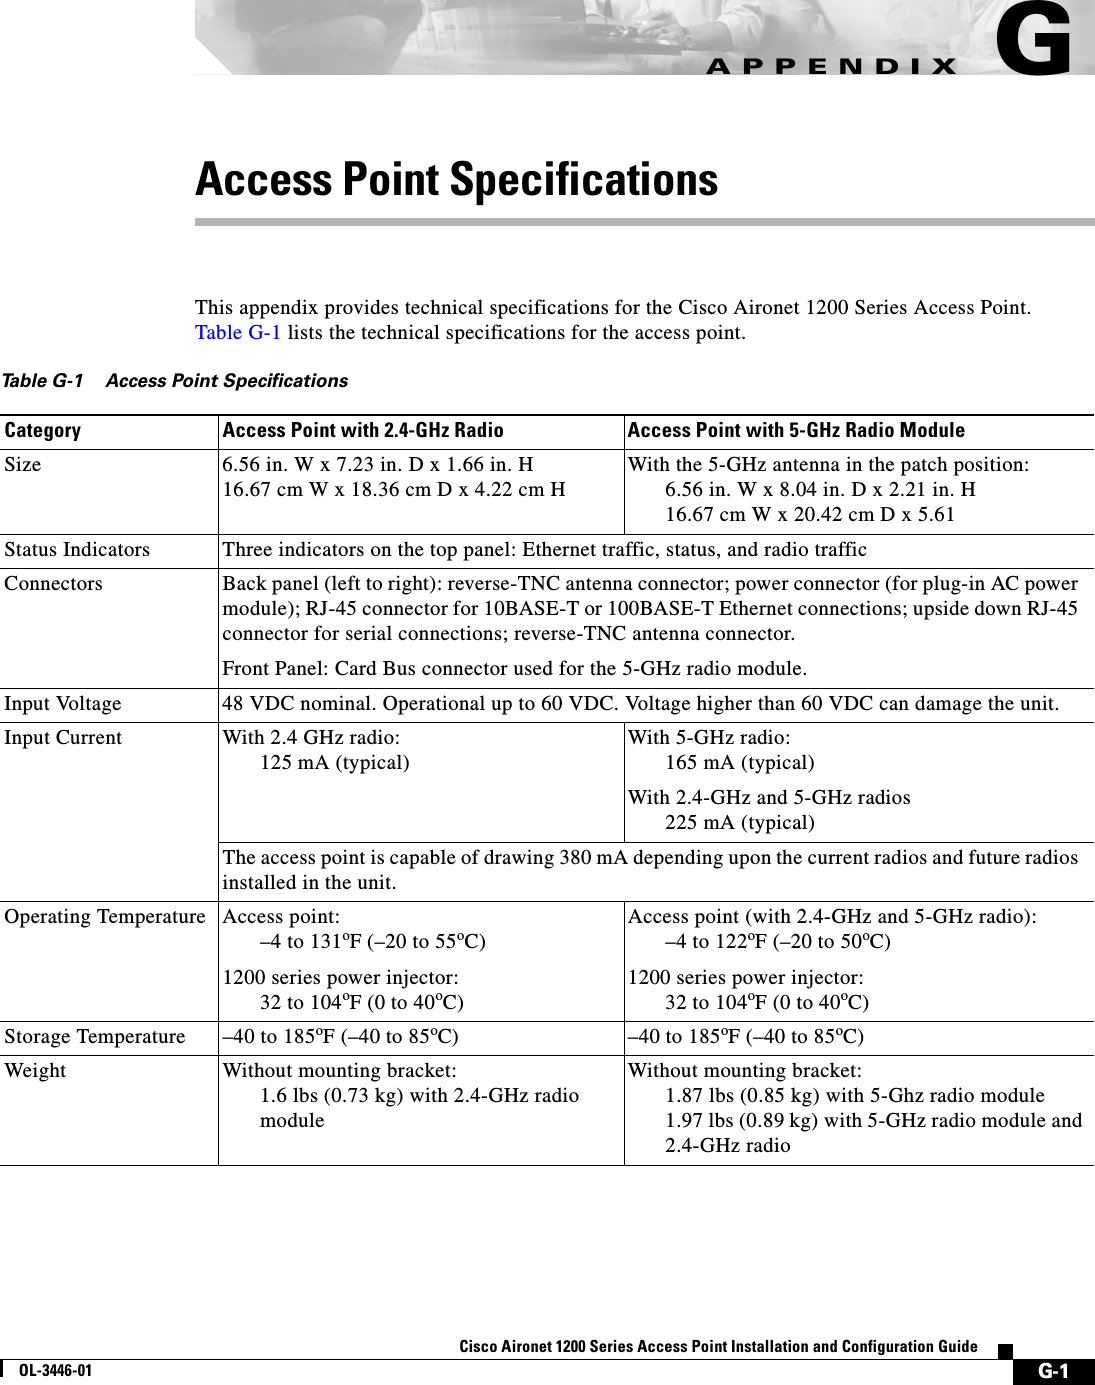 G-1Cisco Aironet 1200 Series Access Point Installation and Configuration GuideOL-3446-01APPENDIXGAccess Point SpecificationsThis appendix provides technical specifications for the Cisco Aironet 1200 Series Access Point. Table G-1 lists the technical specifications for the access point.Table G-1 Access Point SpecificationsCategory Access Point with 2.4-GHz Radio Access Point with 5-GHz Radio ModuleSize 6.56 in. W x 7.23 in. D x 1.66 in. H16.67 cm W x 18.36 cm D x 4.22 cm H With the 5-GHz antenna in the patch position:6.56 in. W x 8.04 in. D x 2.21 in. H 16.67 cm W x 20.42 cm D x 5.61Status Indicators Three indicators on the top panel: Ethernet traffic, status, and radio trafficConnectors Back panel (left to right): reverse-TNC antenna connector; power connector (for plug-in AC power module); RJ-45 connector for 10BASE-T or 100BASE-T Ethernet connections; upside down RJ-45 connector for serial connections; reverse-TNC antenna connector.Front Panel: Card Bus connector used for the 5-GHz radio module.Input Voltage  48 VDC nominal. Operational up to 60 VDC. Voltage higher than 60 VDC can damage the unit.Input Current With 2.4 GHz radio:125 mA (typical)With 5-GHz radio:165 mA (typical) With 2.4-GHz and 5-GHz radios225 mA (typical) The access point is capable of drawing 380 mA depending upon the current radios and future radios installed in the unit.Operating Temperature Access point:–4 to 131oF (–20 to 55oC) 1200 series power injector:32 to 104oF (0 to 40oC)Access point (with 2.4-GHz and 5-GHz radio):–4 to 122oF (–20 to 50oC)1200 series power injector:32 to 104oF (0 to 40oC)Storage Temperature  –40 to 185oF (–40 to 85oC) –40 to 185oF (–40 to 85oC) Weight Without mounting bracket:1.6 lbs (0.73 kg) with 2.4-GHz radiomoduleWithout mounting bracket:1.87 lbs (0.85 kg) with 5-Ghz radio module1.97 lbs (0.89 kg) with 5-GHz radio module and2.4-GHz radio